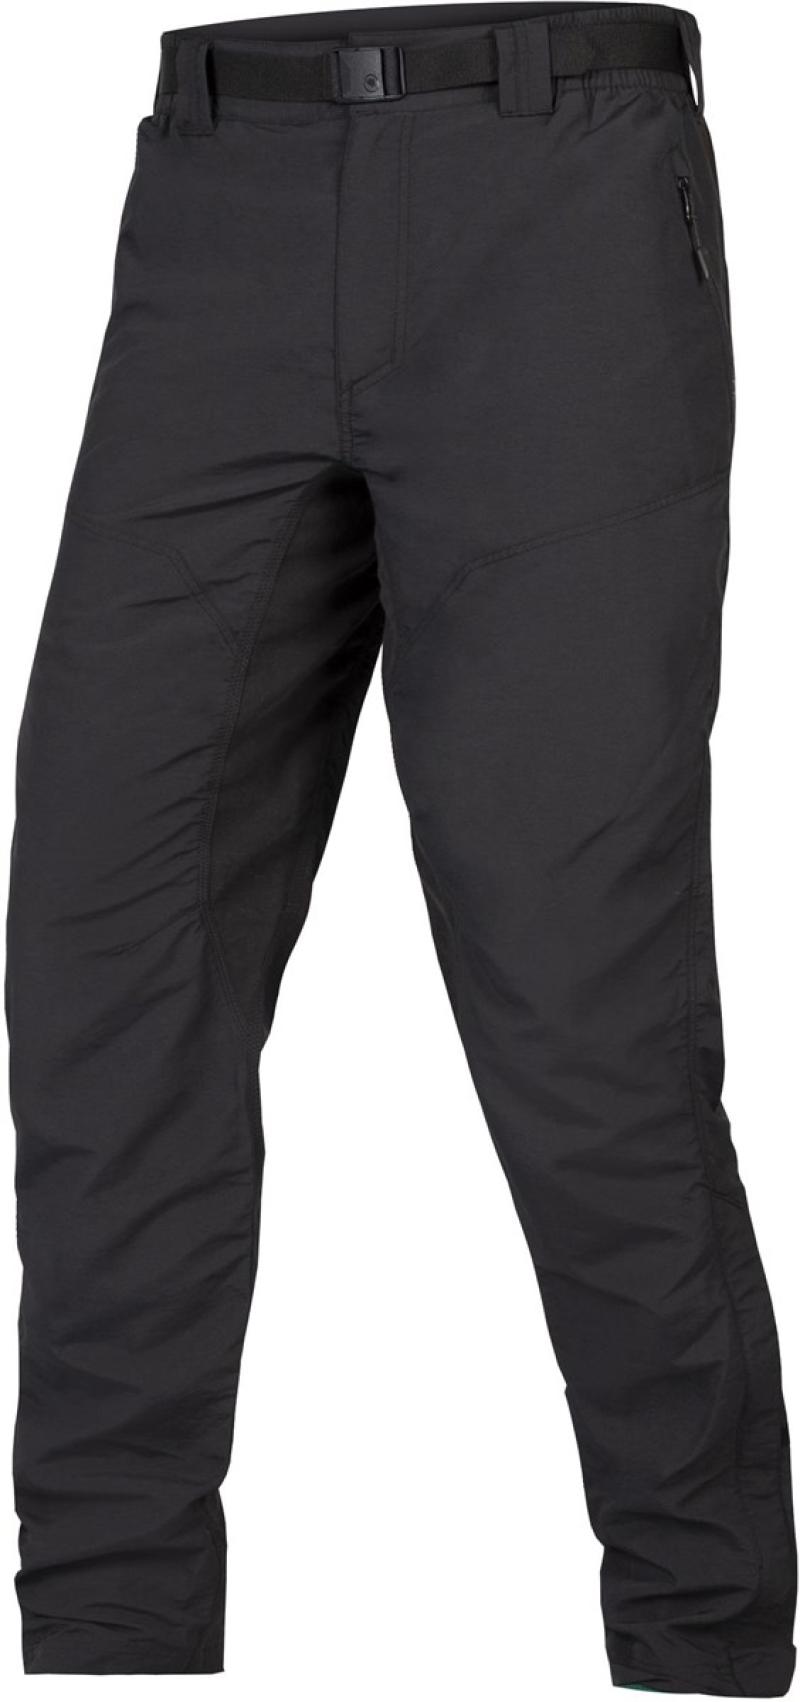 A pair of black waterproof cycling trousers